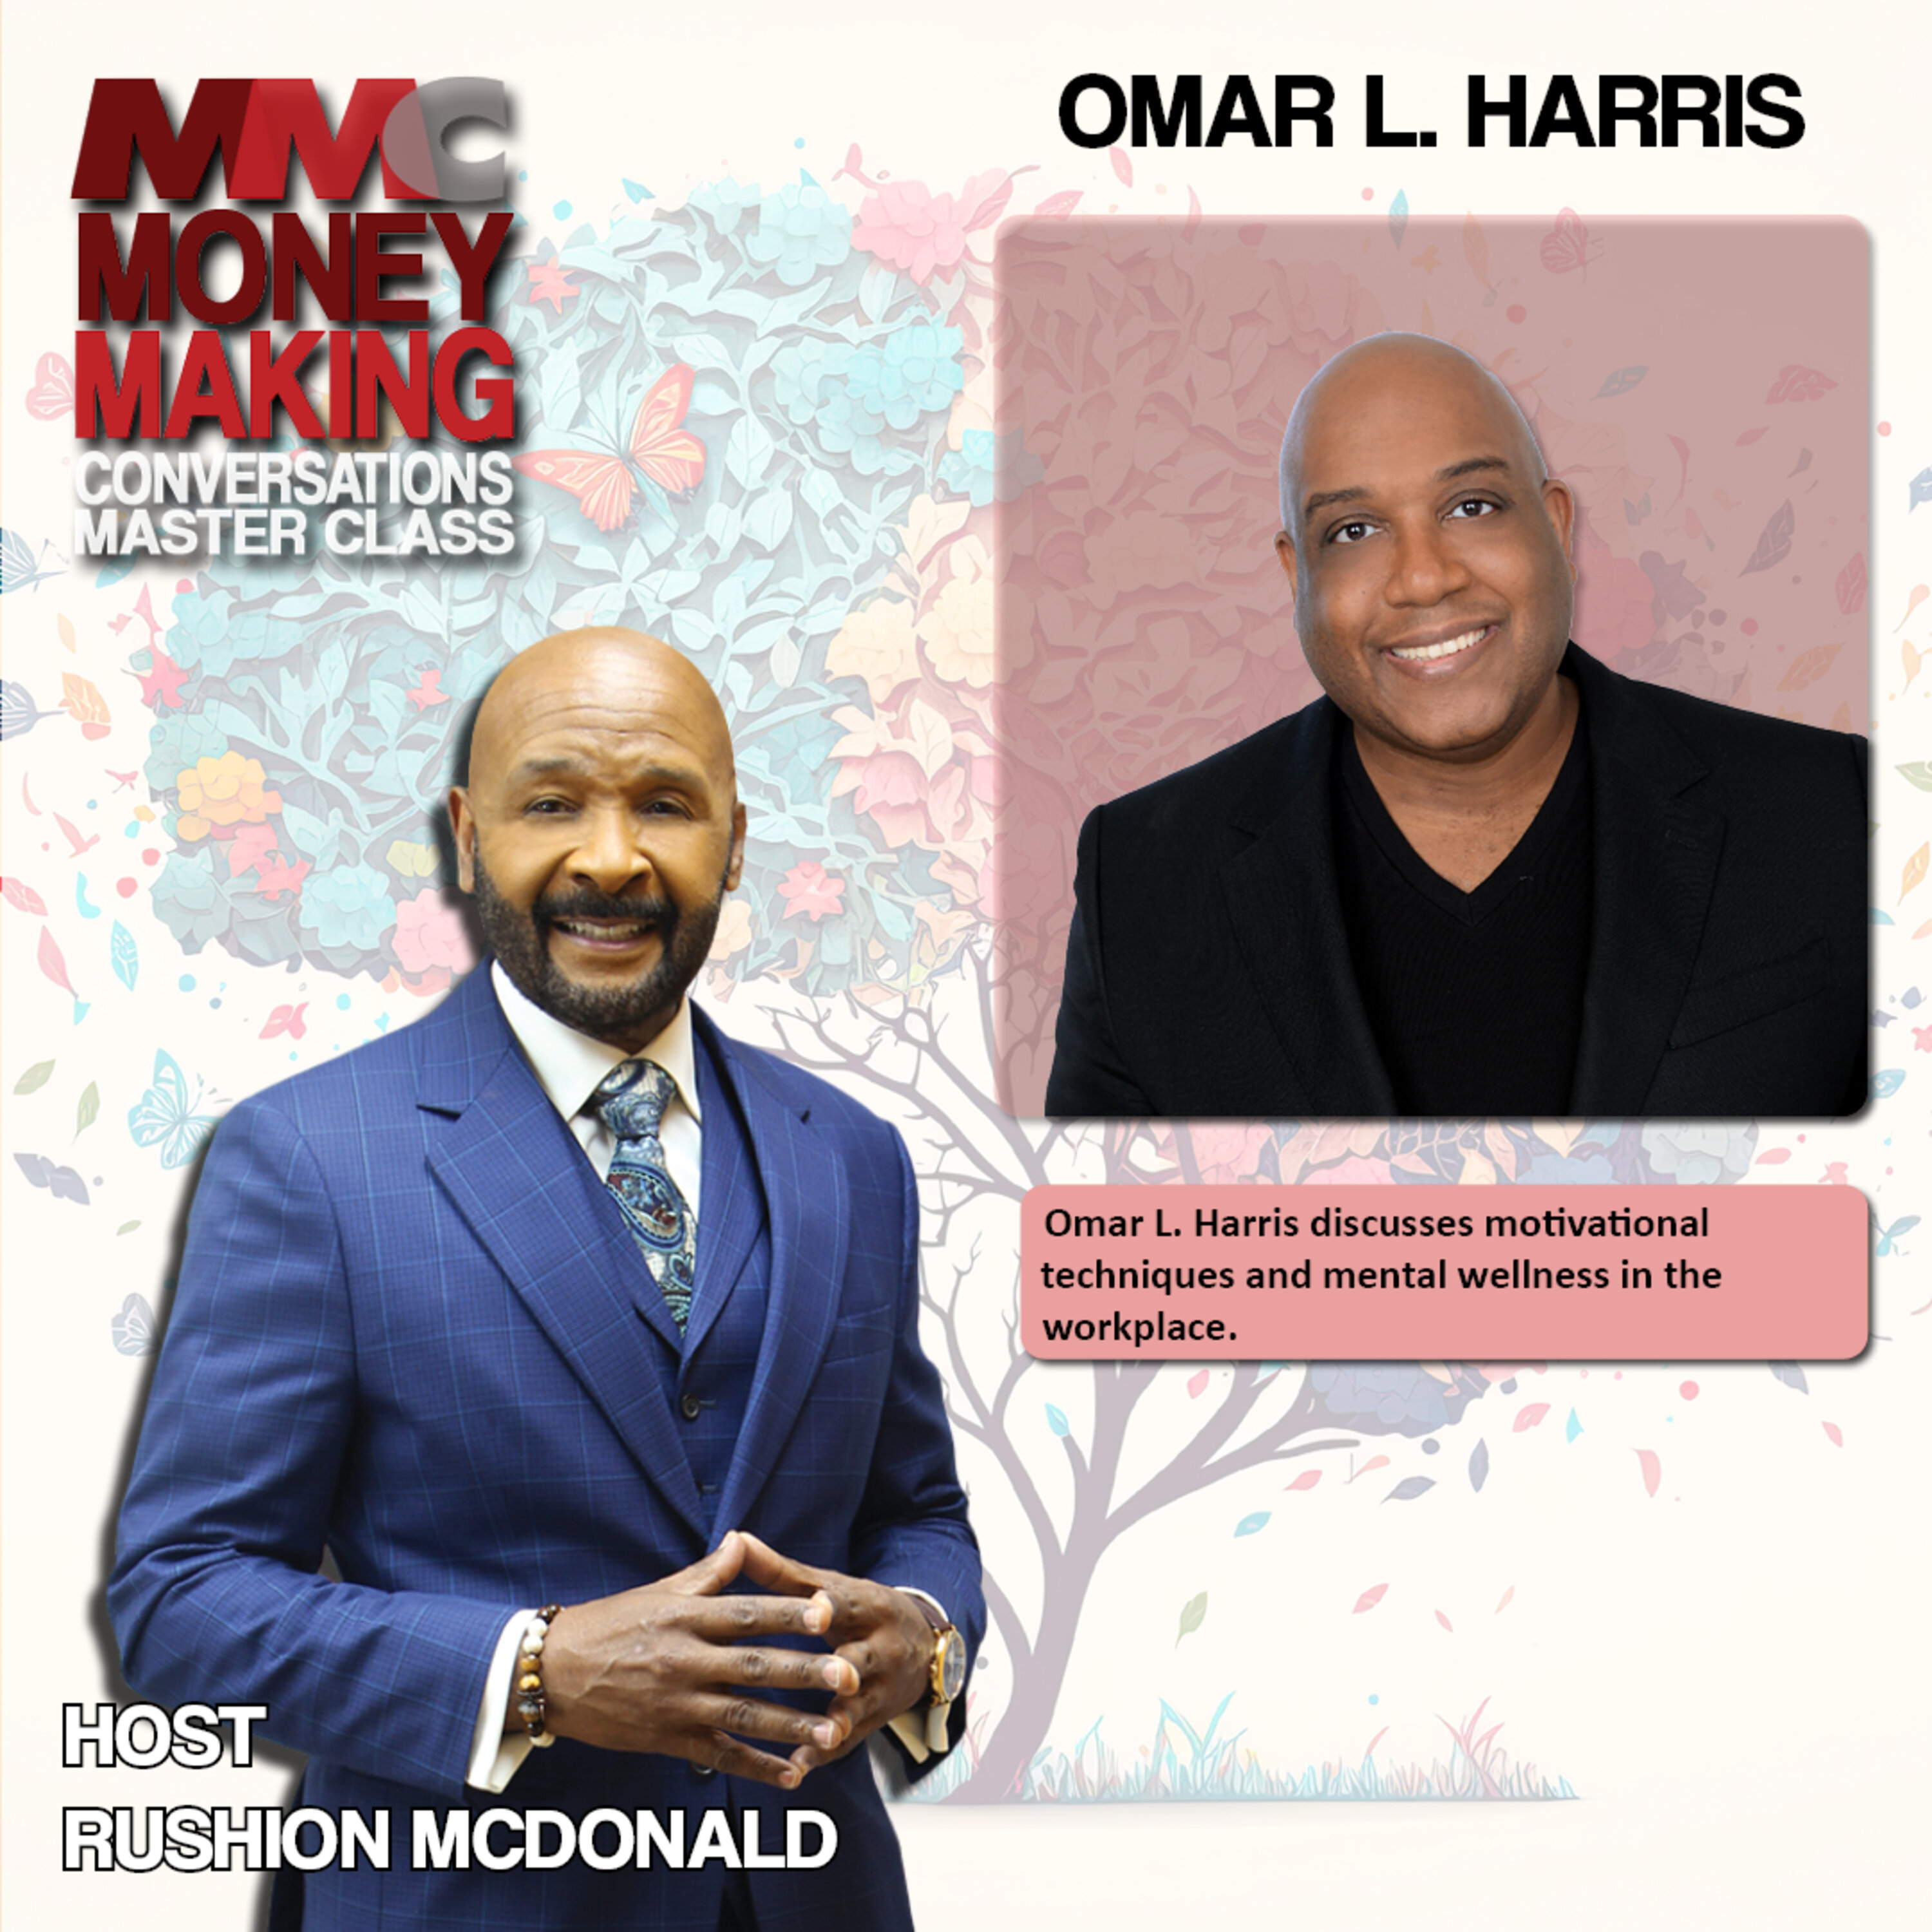 Motivational Techniques: Insights into motivating oneself and employees by Omar L. Harris.